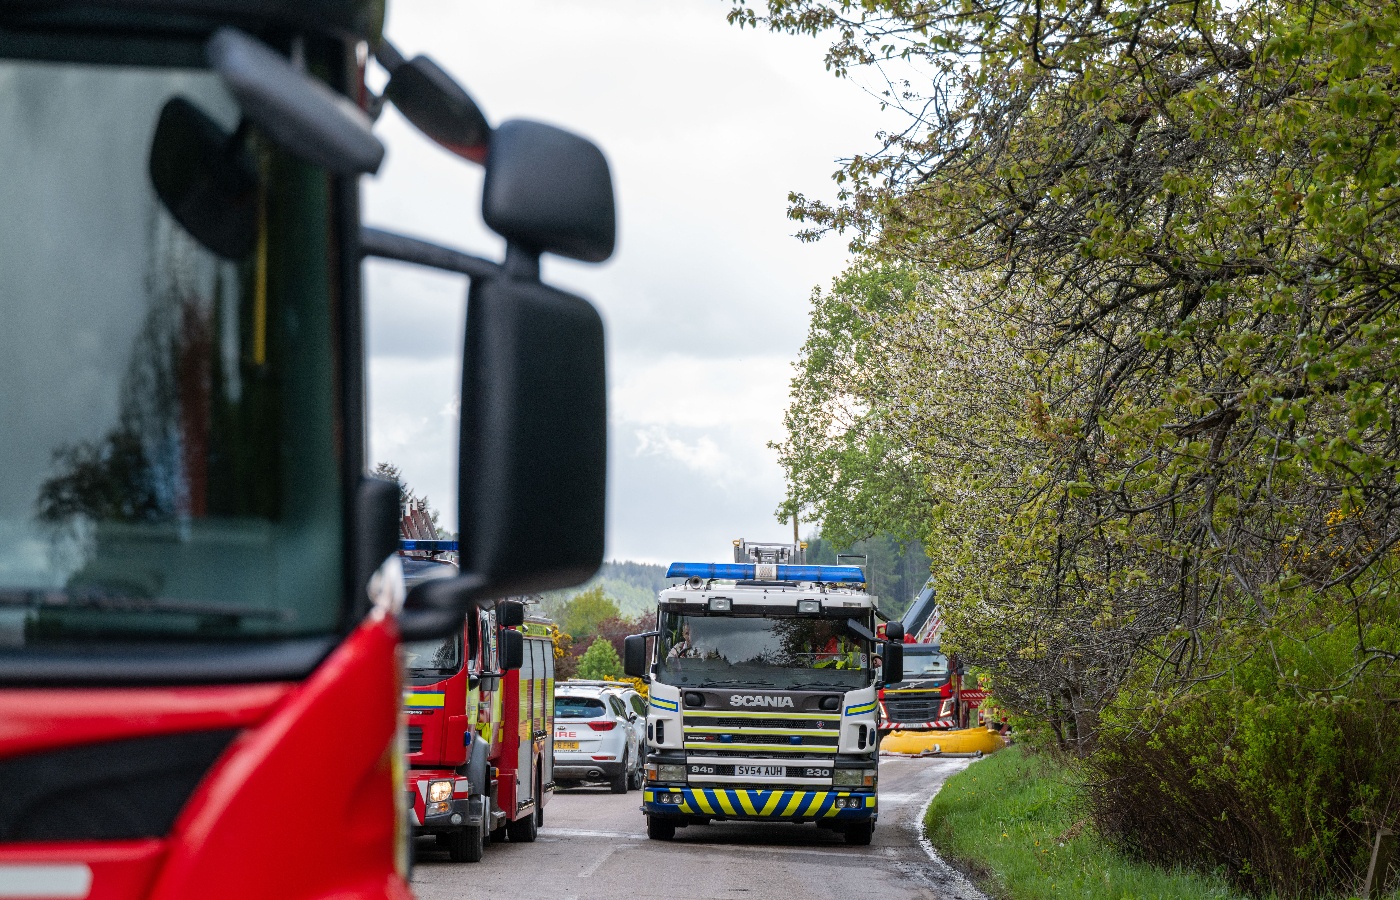 11 fire engines were sent to the scene. 